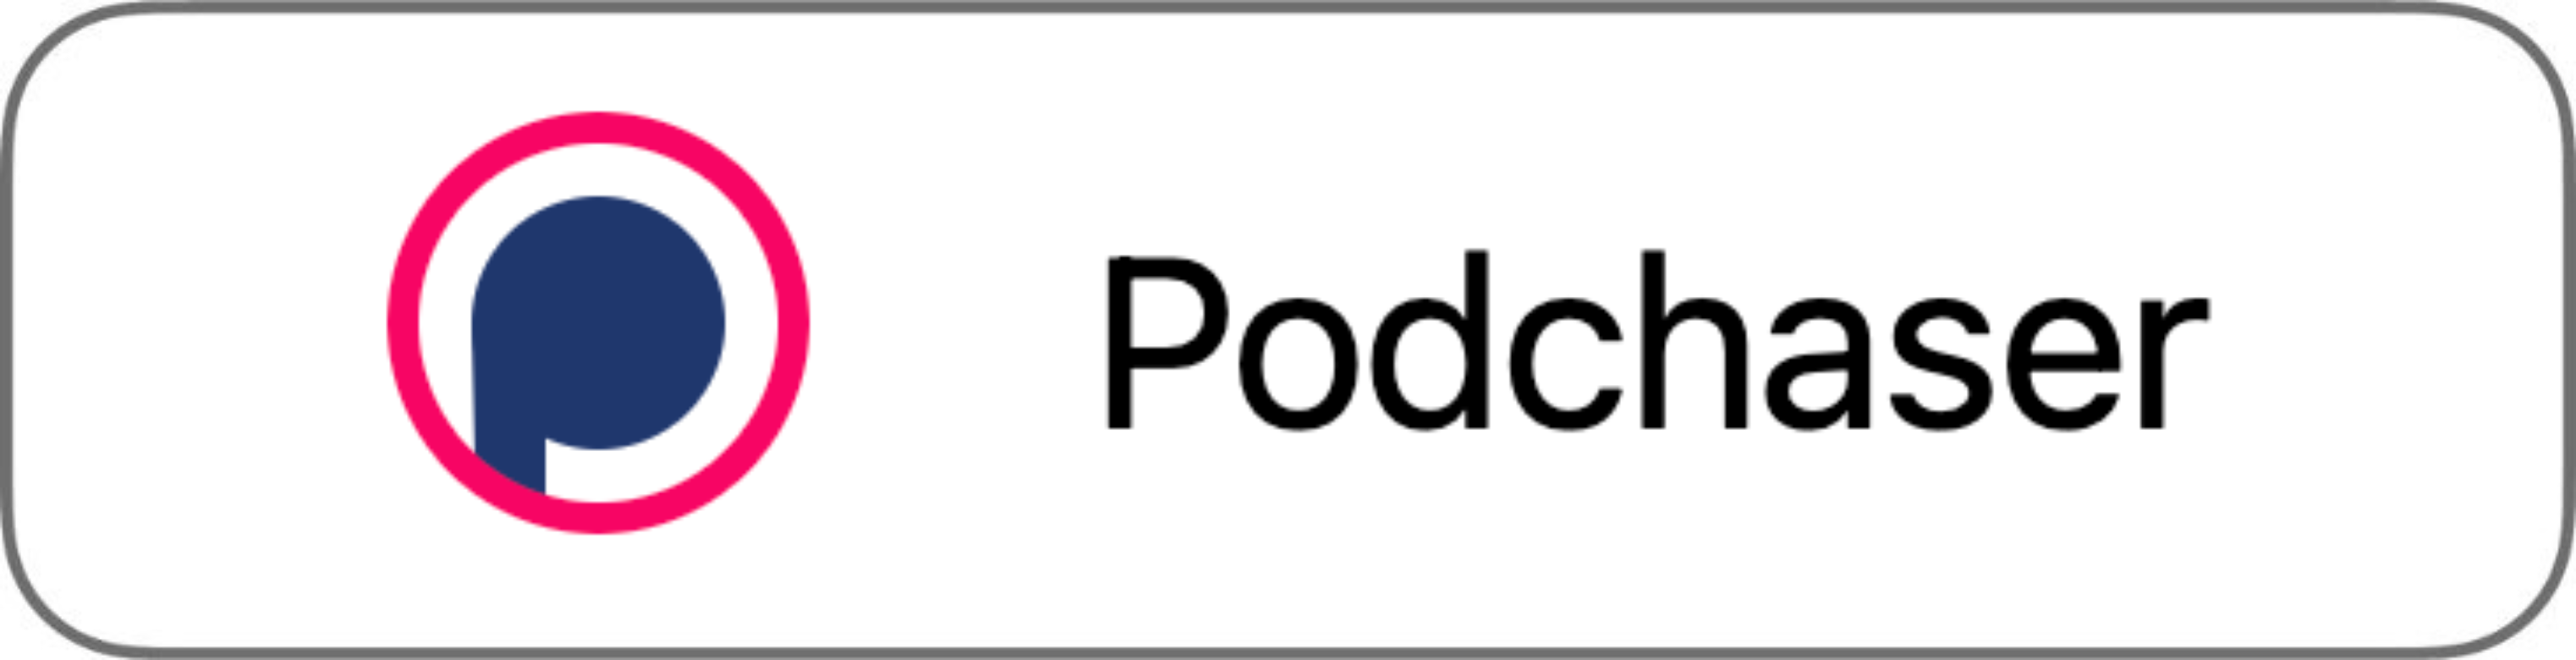 Podchaser - The Employee Advocacy & Influence Podcast by DSMN8